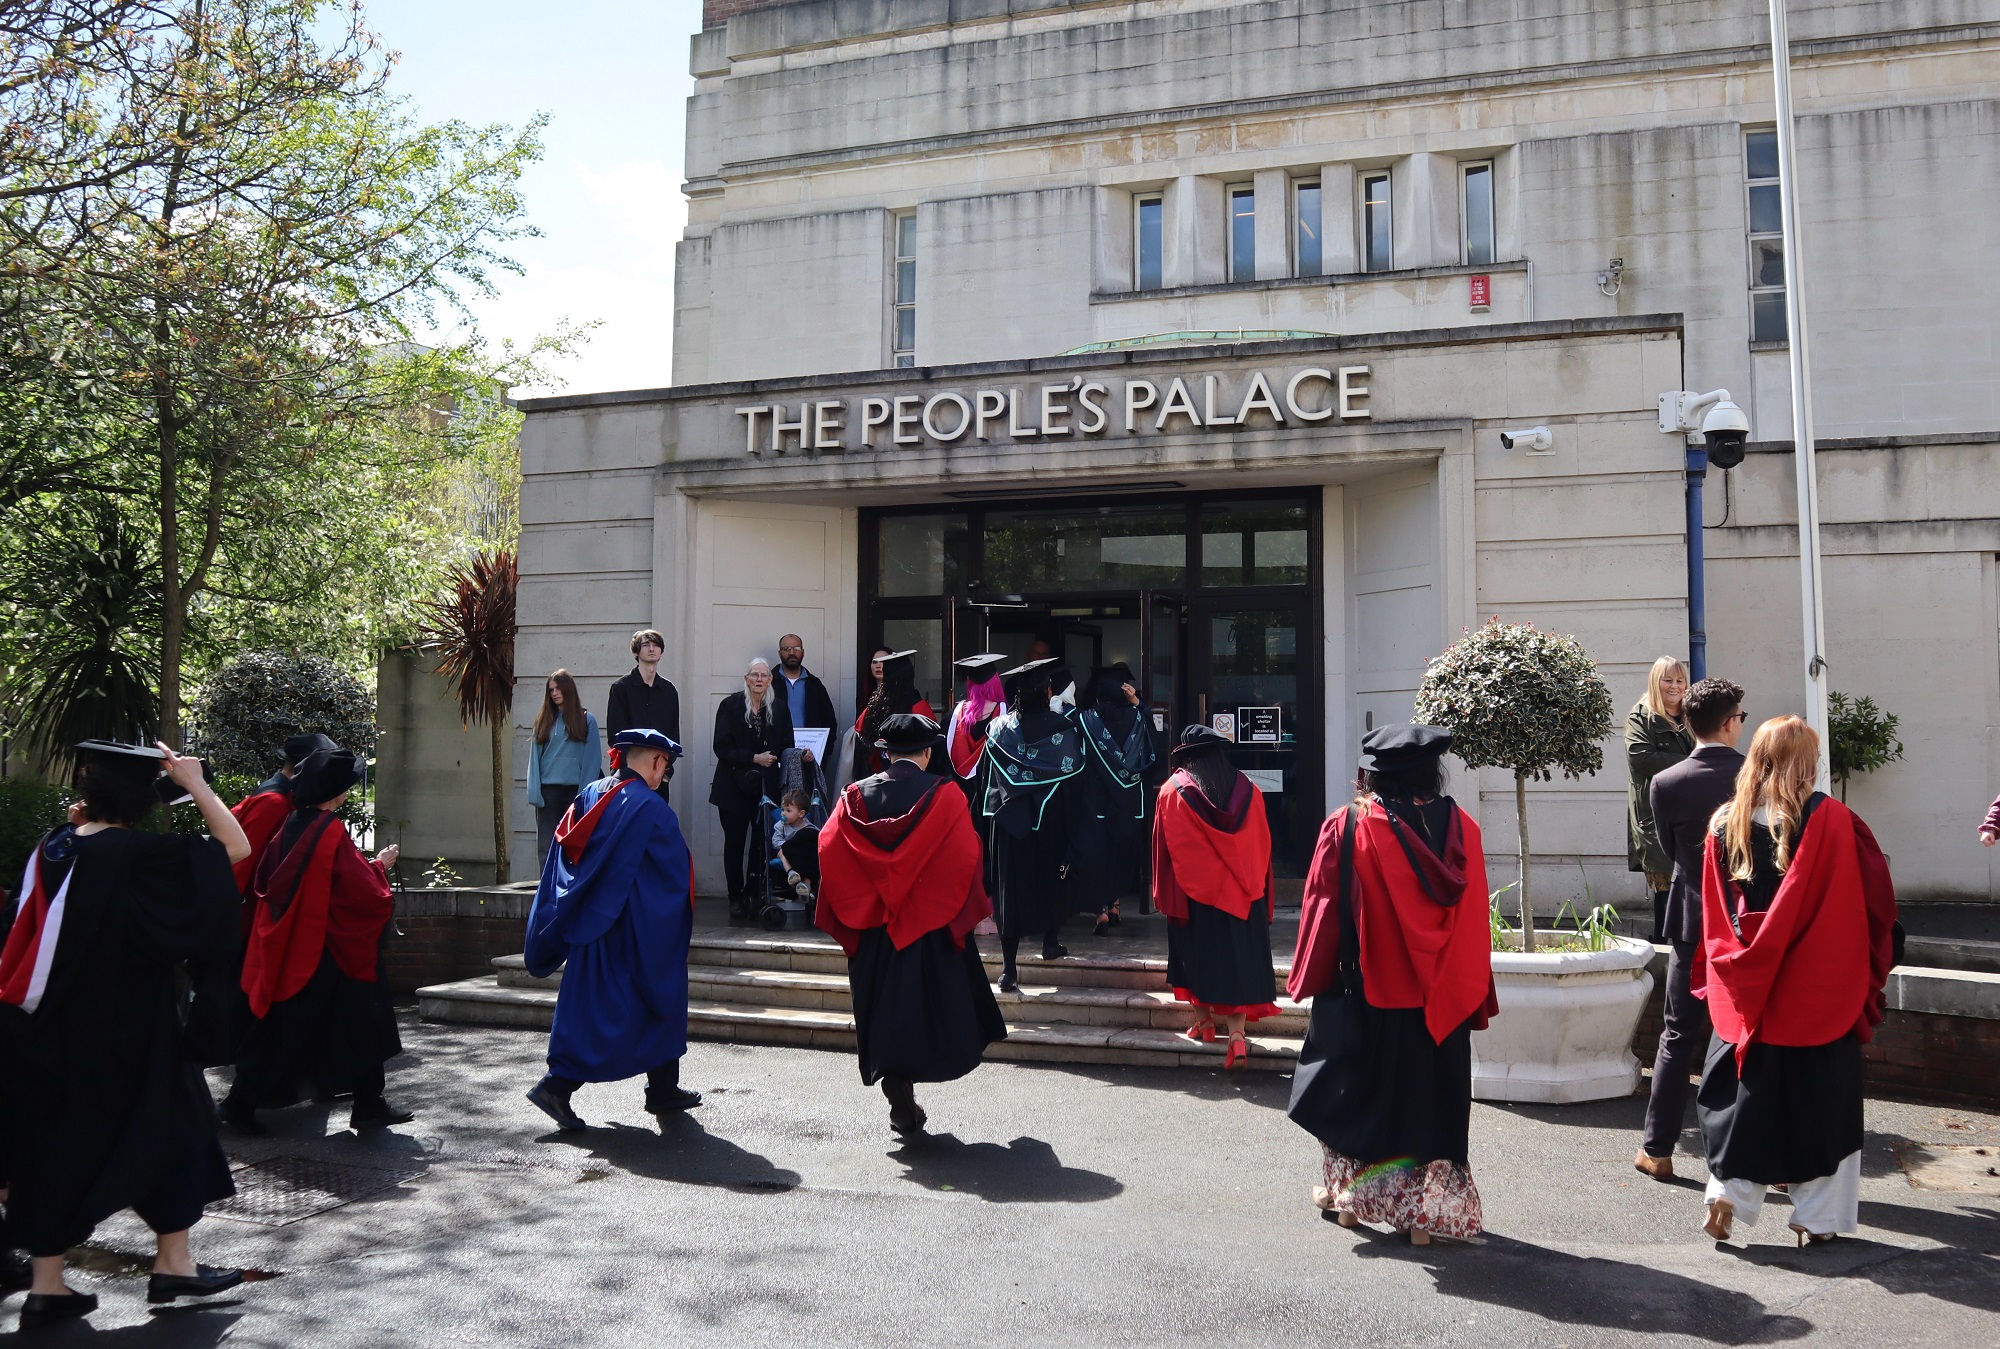 Graduates entering The People's Palace